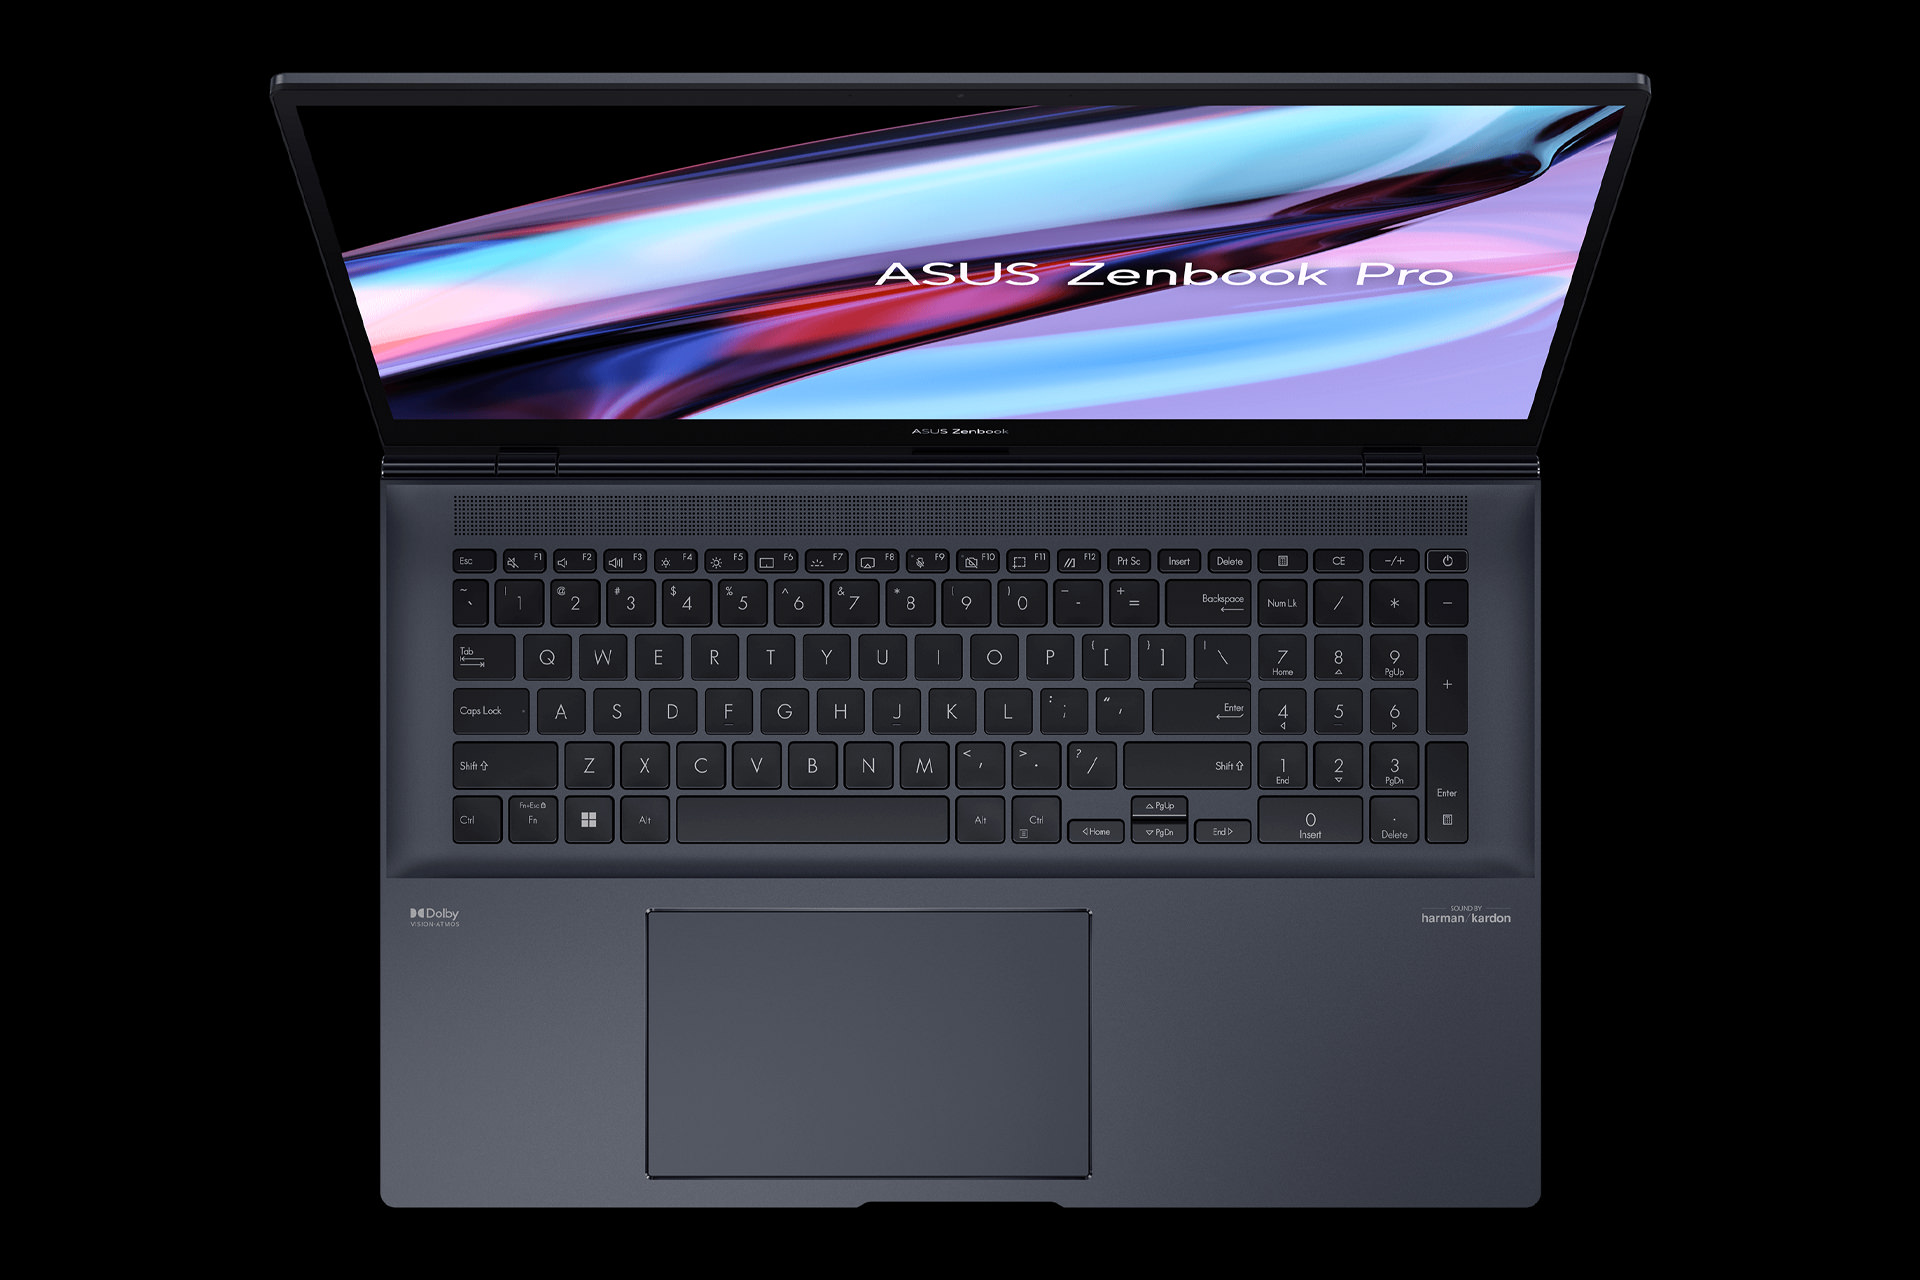 Asus Zenbook Pro 17 Asus laptop from the top view